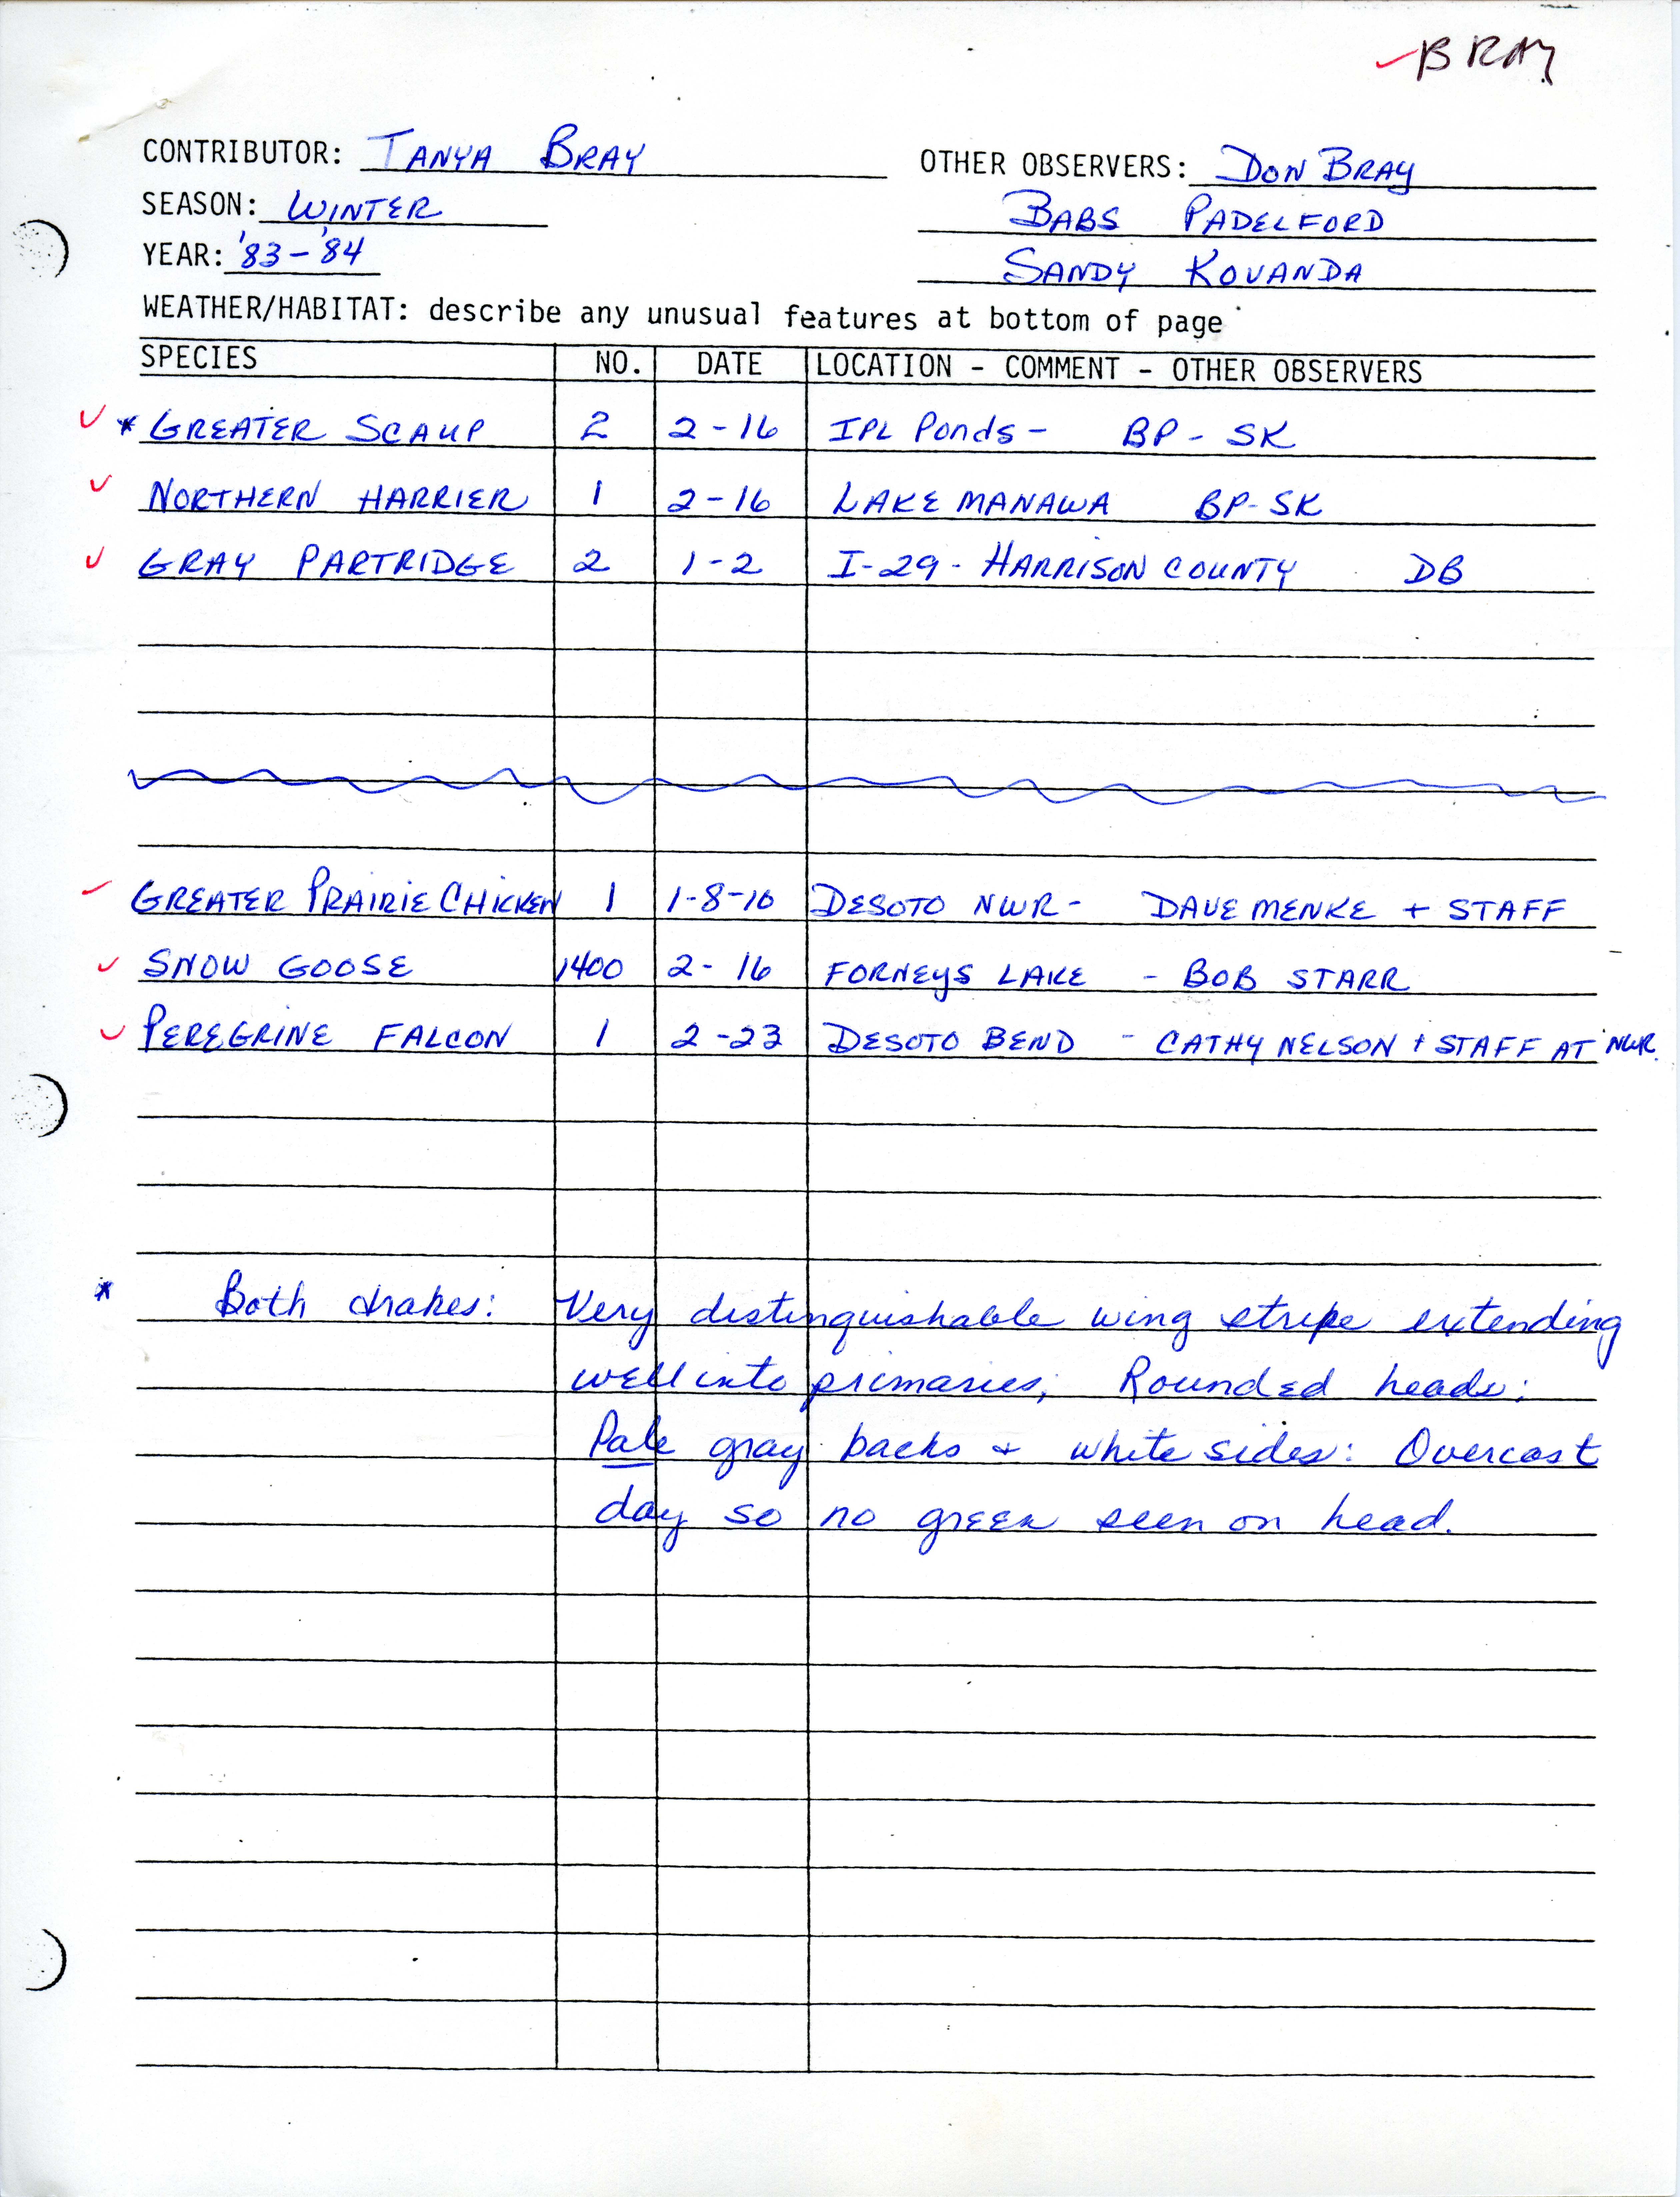 Field notes contributed by Tanya Bray, winter 1983-1984